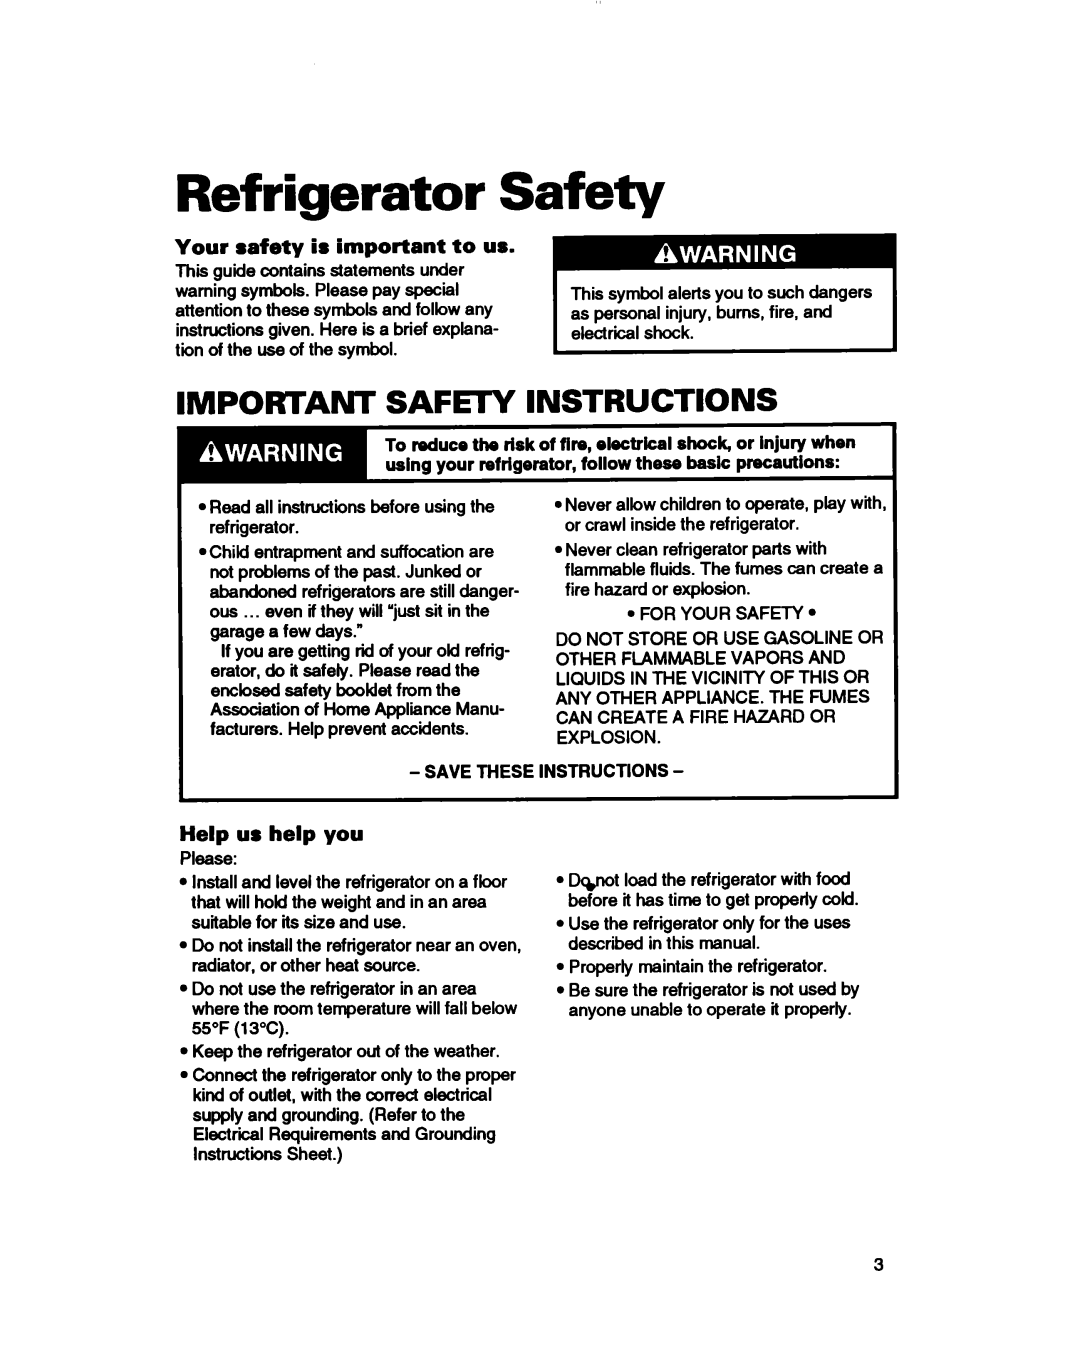 Roper RT18EK, RT18DK Refrigerator Safety, IMPORTANT SAFtXY INSTRUCTIONS, Your safety is important to us, Help us help you 